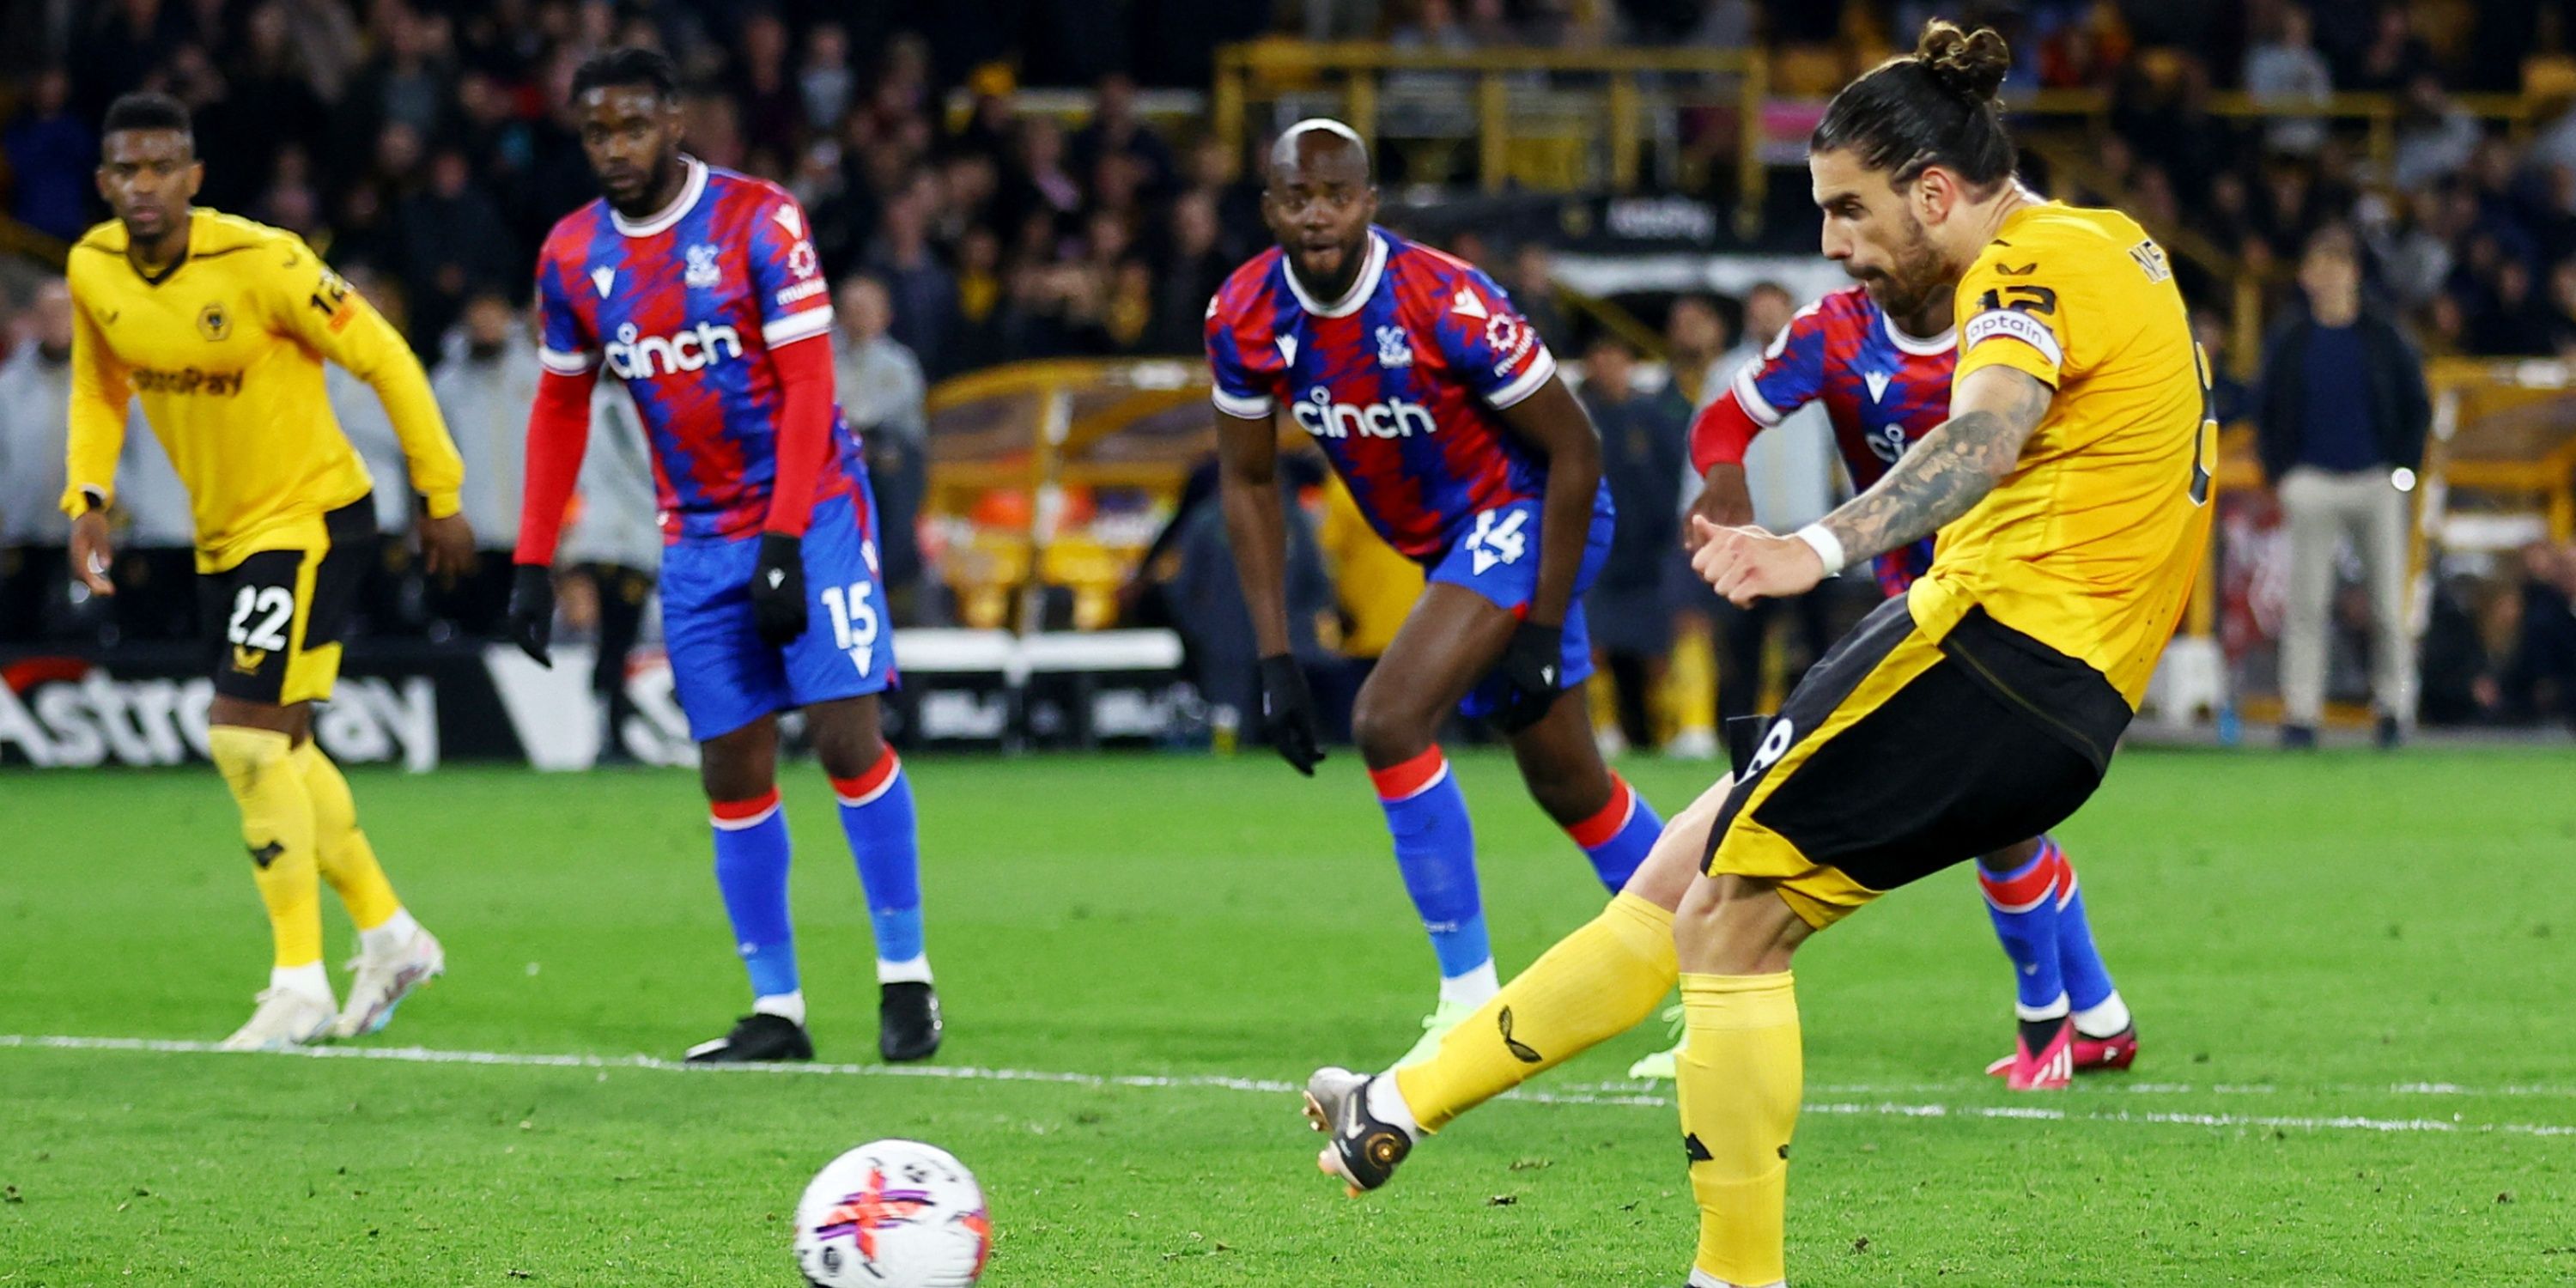 Ruben-Neves-scoring-for-Wolves-against-Crystal-Palace